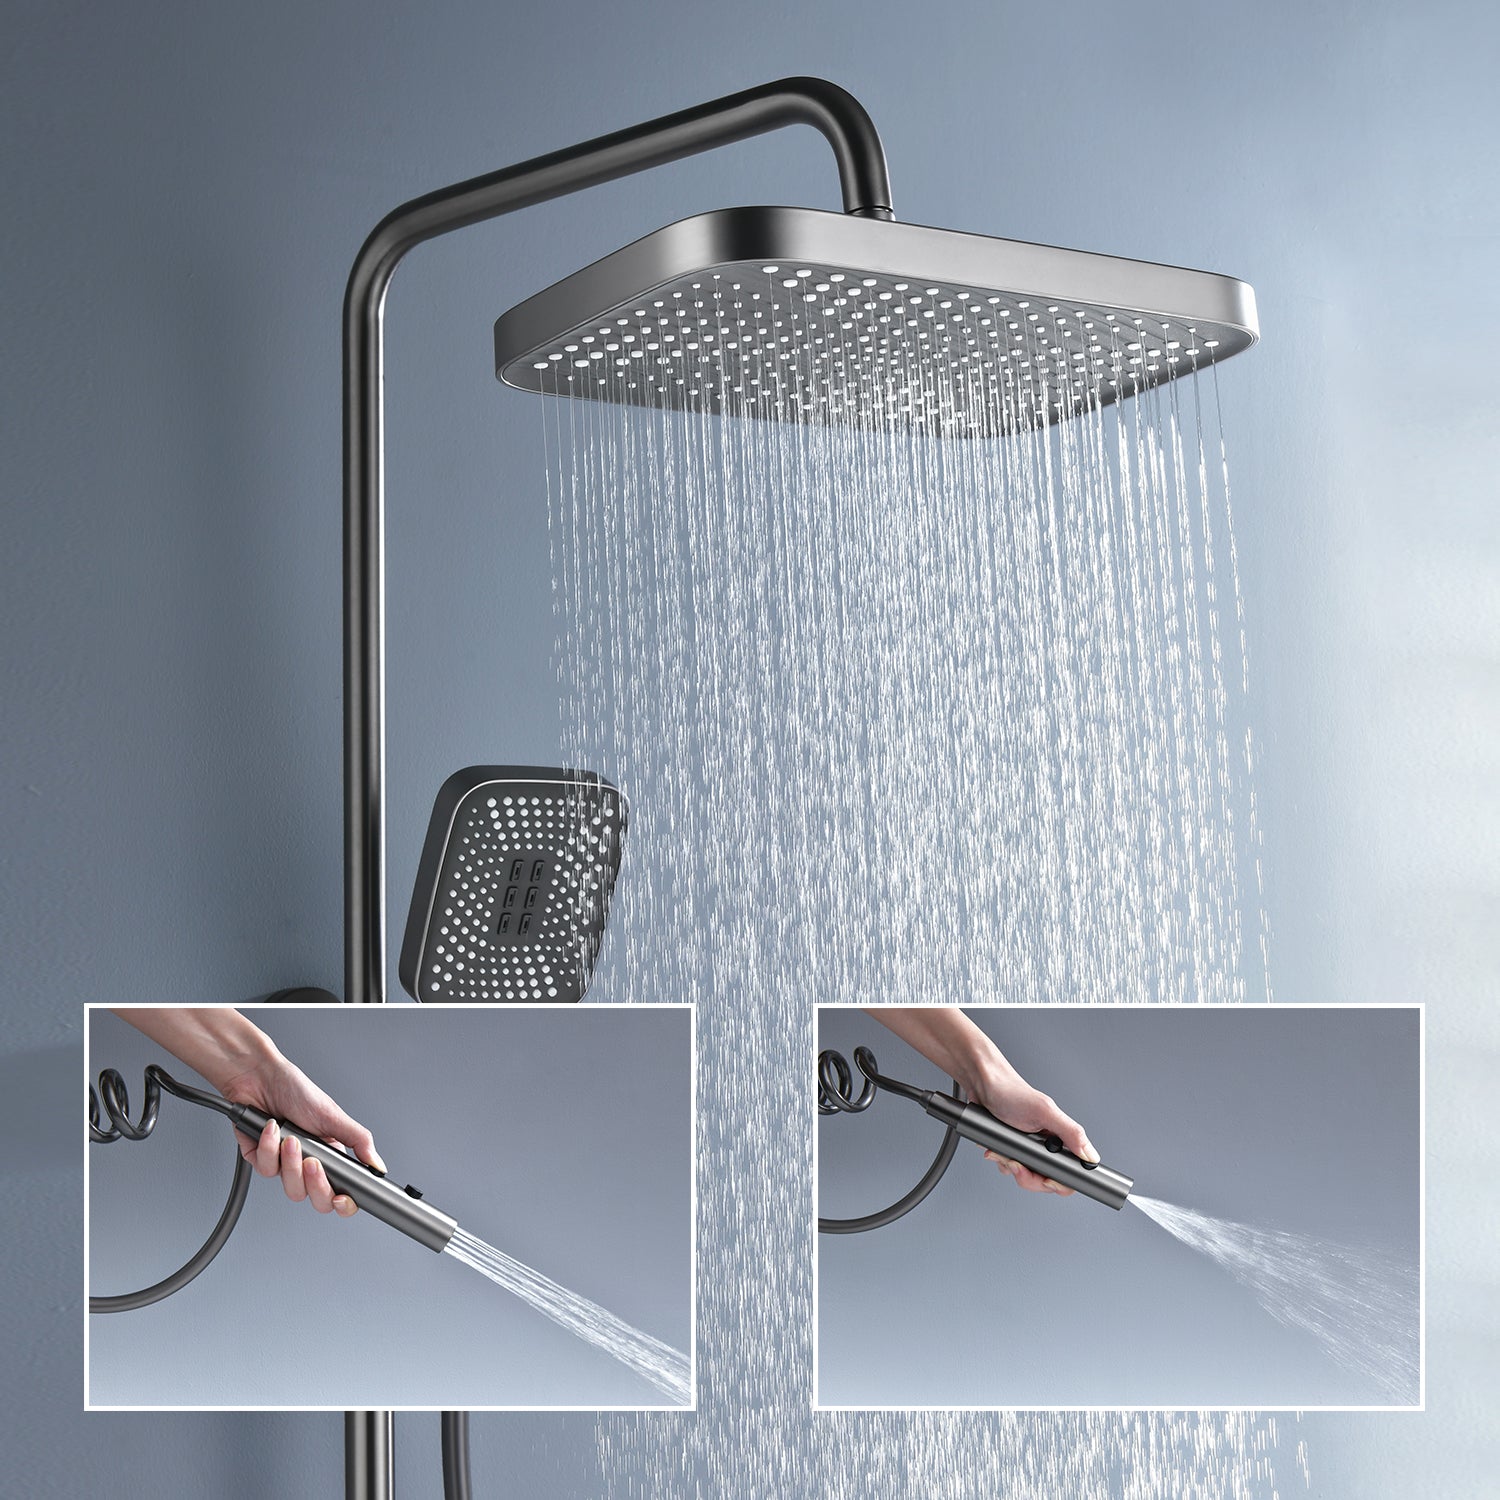 Lefton Shower System with 4 Water Outlet Modes